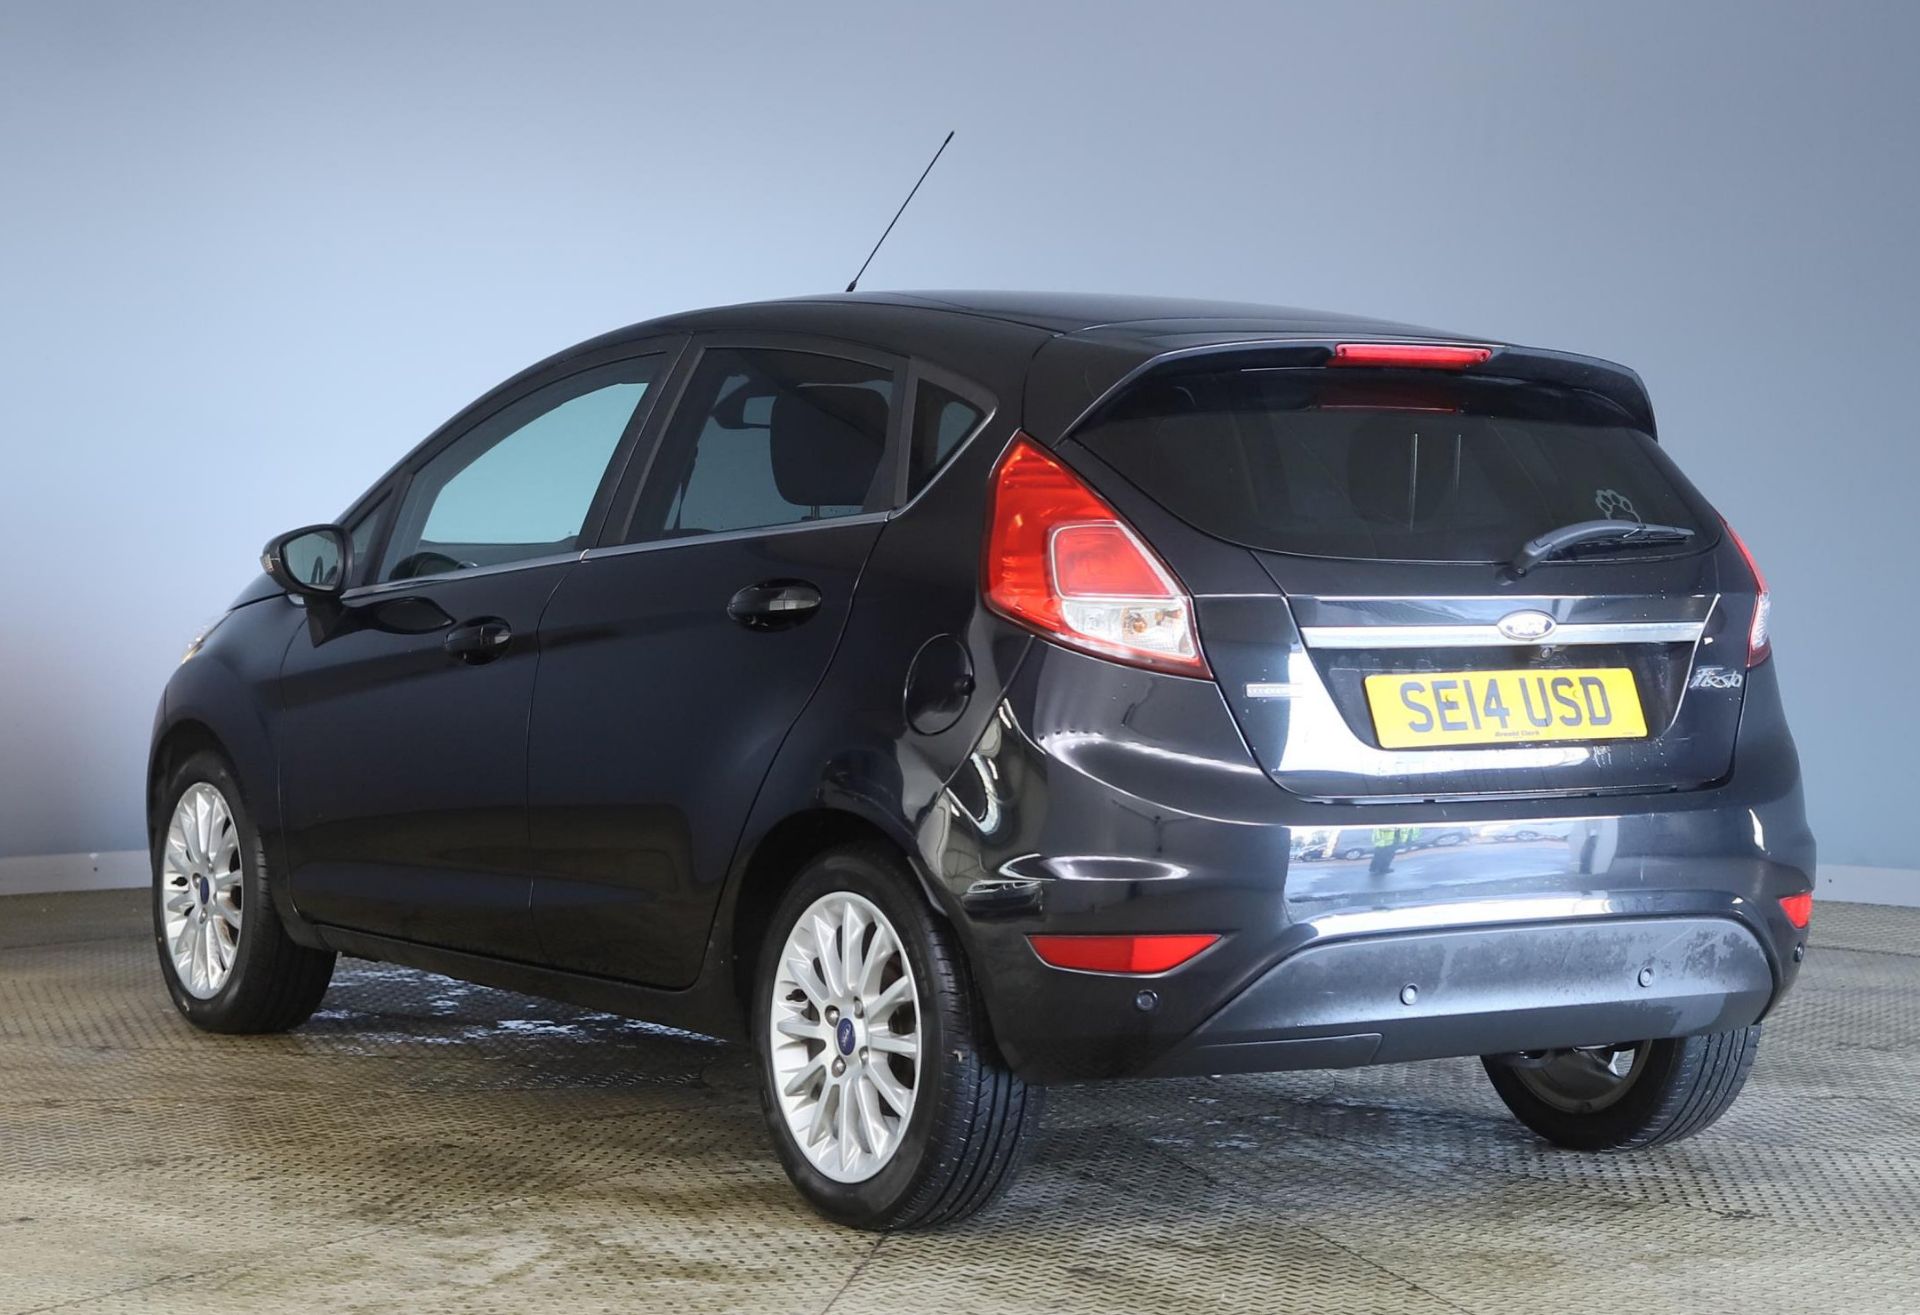 2014 Ford Fiesta 1.0 Titanium X 5 Door Hatchback - CL505 - NO VAT ON THE HAMMER- Location: Corby, - Image 4 of 12